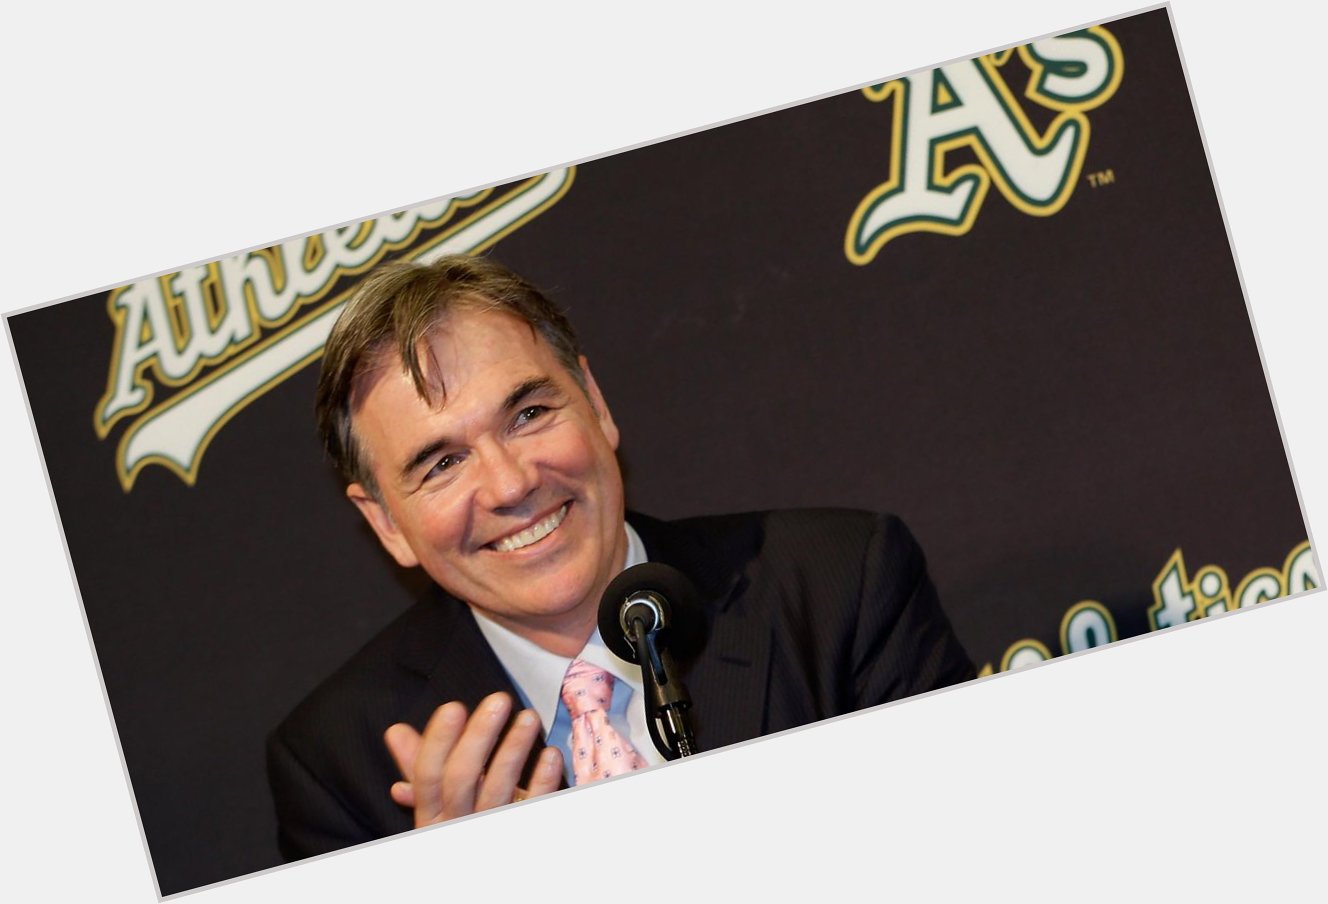 Happy Birthday to Billy Beane, who turns 53 today! 